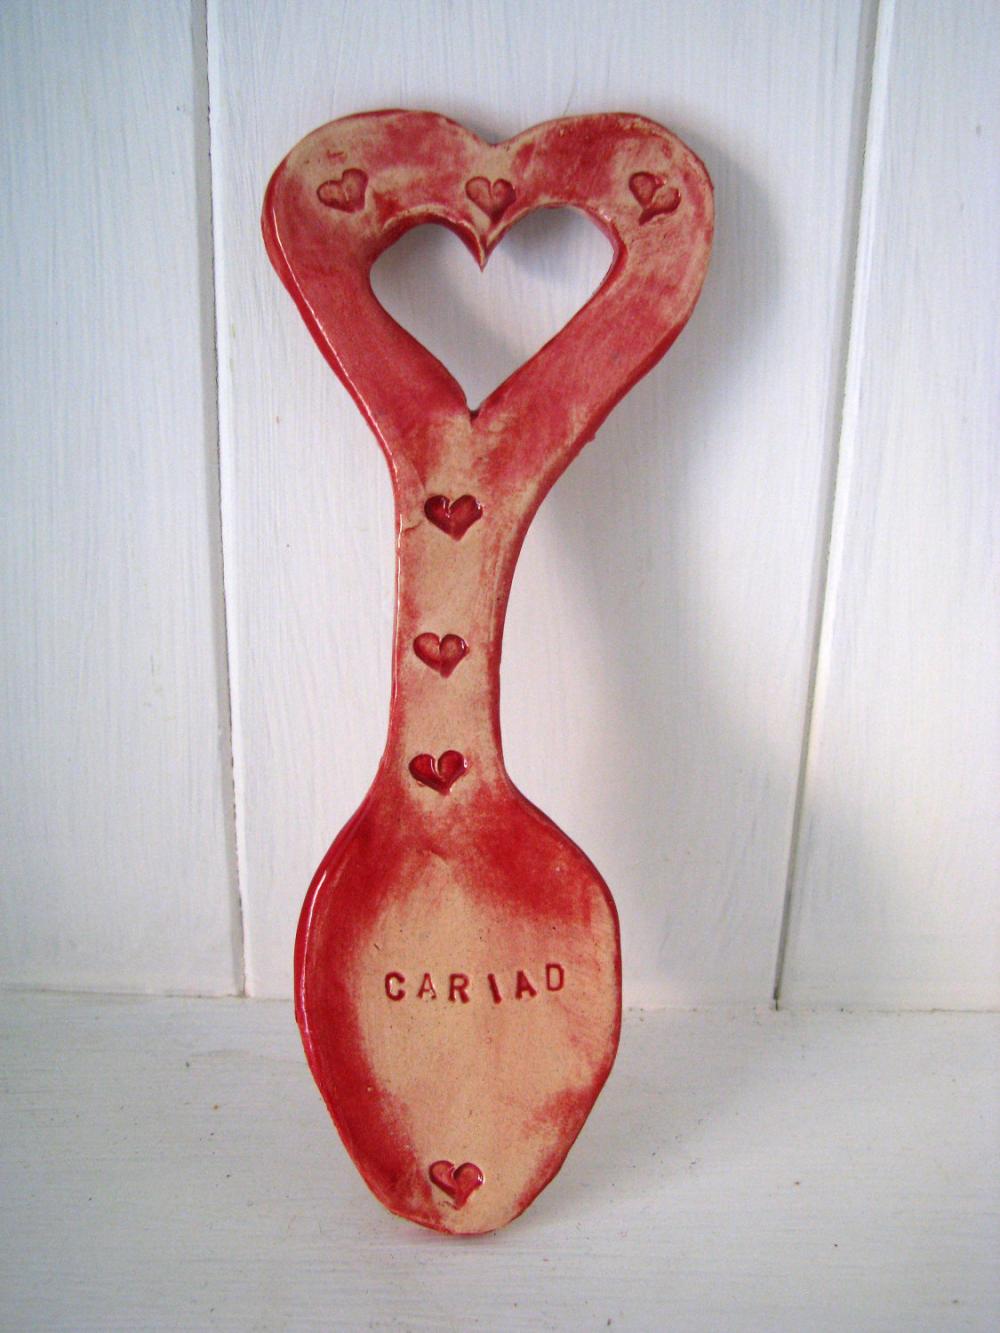 Cariad (love In Welsh) Ceramic Lovespoon. Made In Wales, Uk. Ready To Ship.